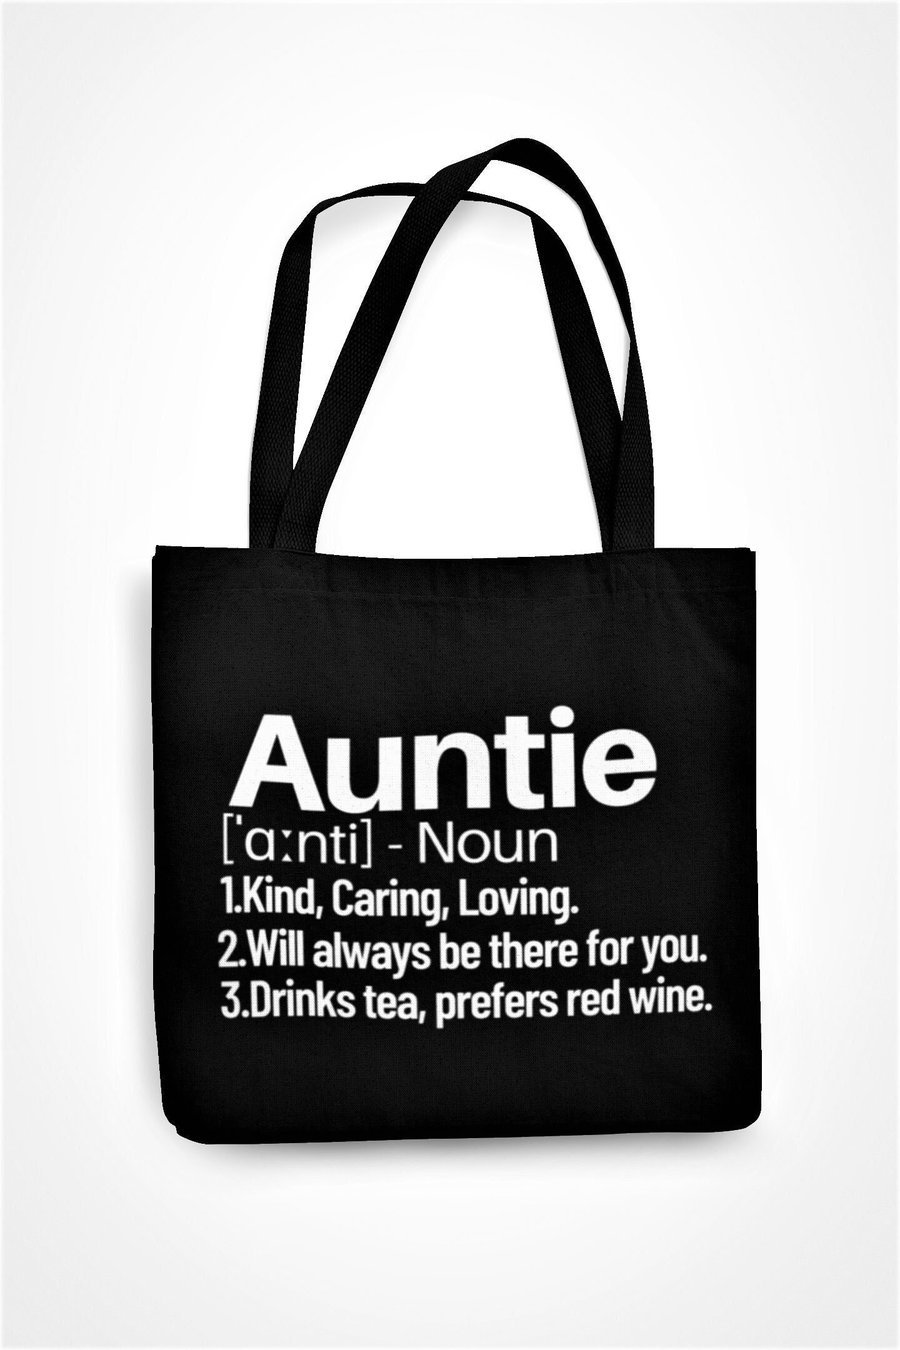 Auntie Noun Tote Bag Auntie Definition Gift For Aunt Noun Gift For Her Birthday 